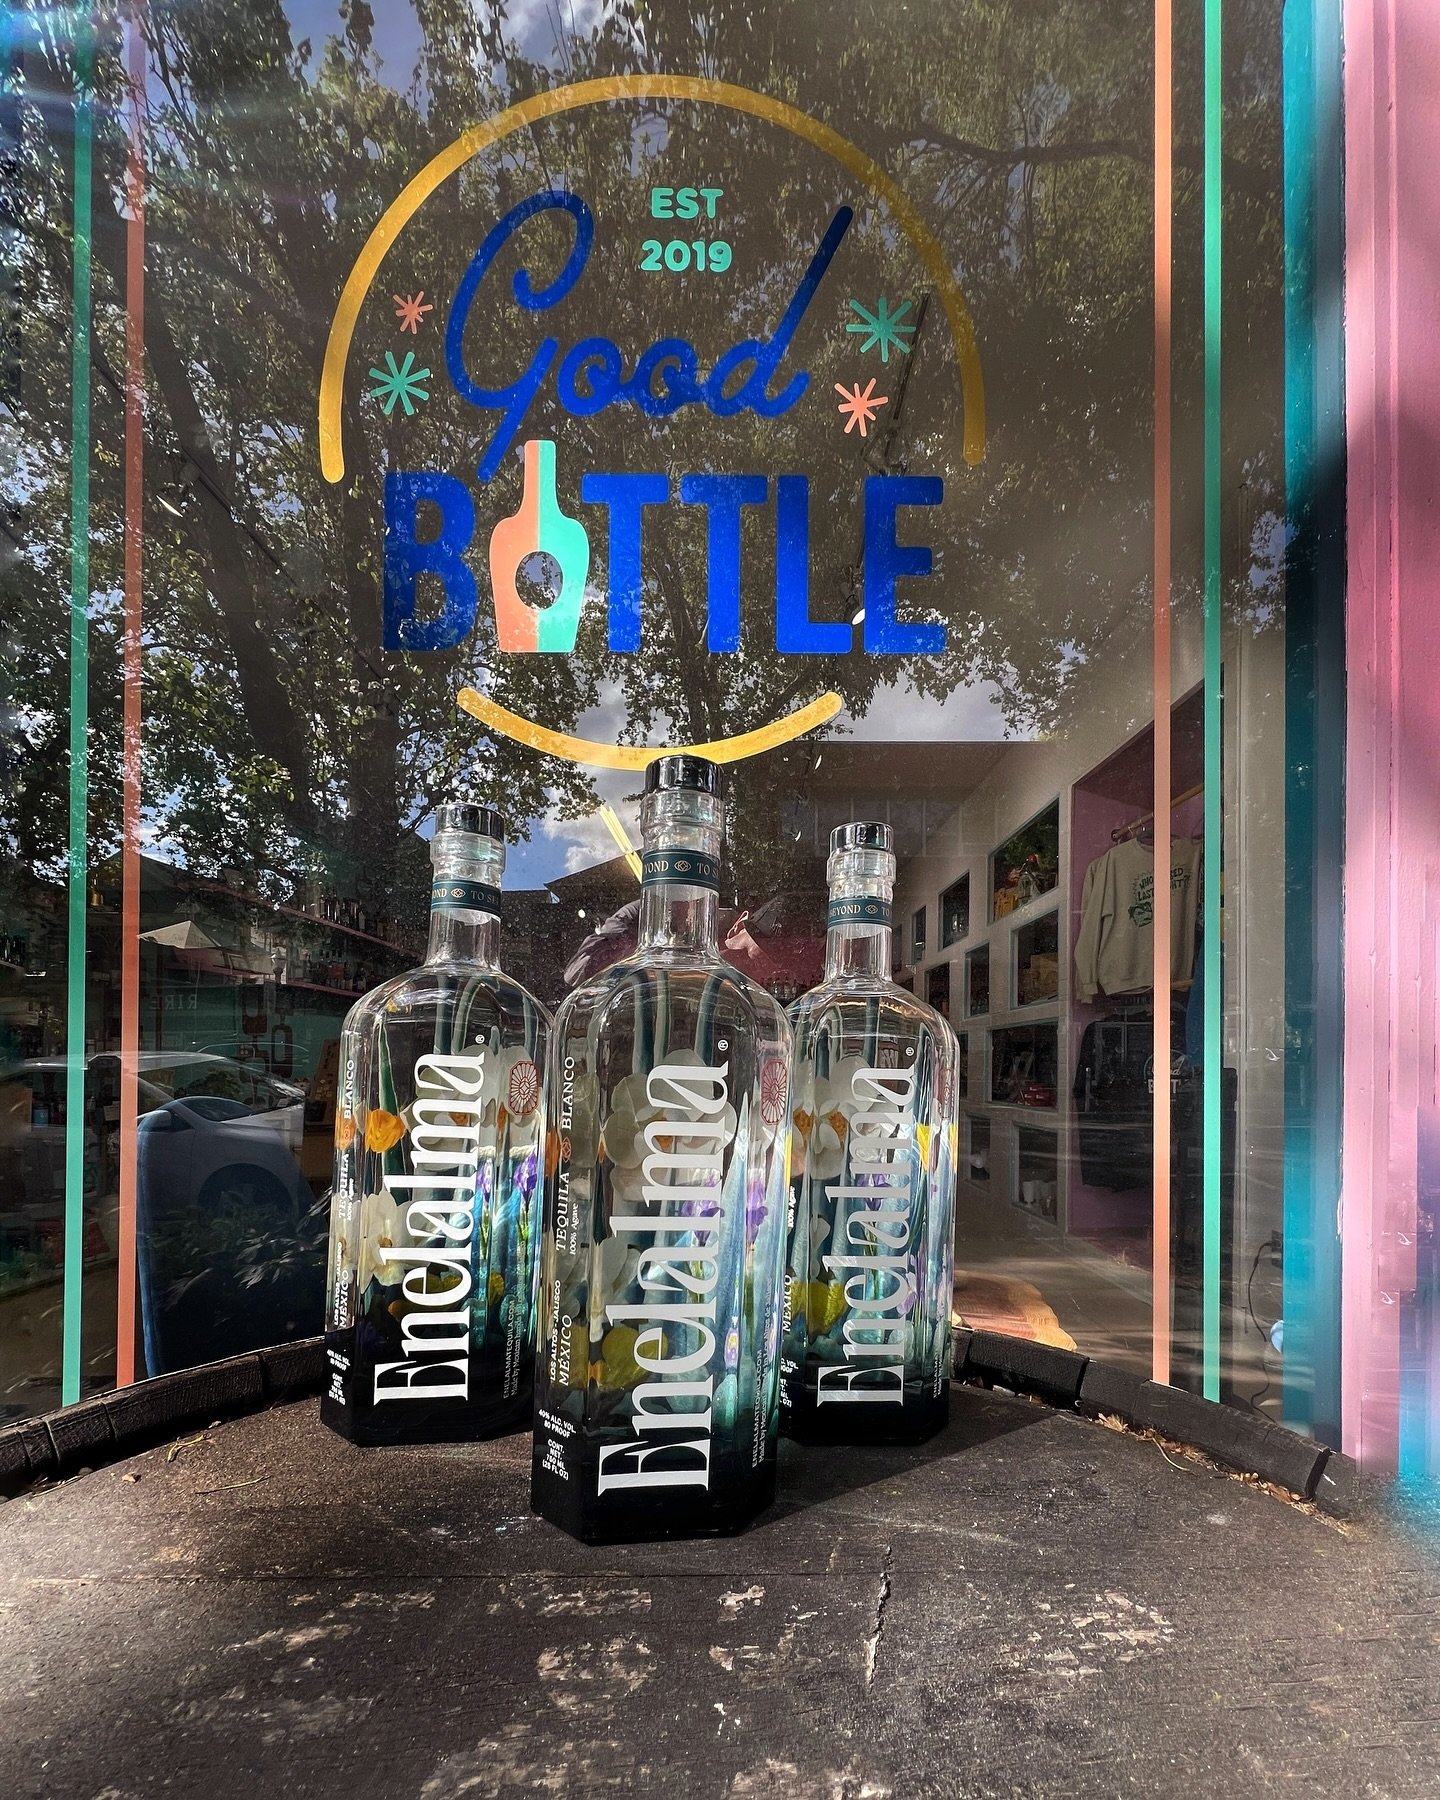 @enelalmatequila NOM 1639 
Additive free
A wonderful story about doing things the &ldquo;right way&rdquo; and fantastic package that makes you feel excited to show it off.

Have you tried it yet?
.
.
.
.
#tequila #additivefreetequila #additivefree #g